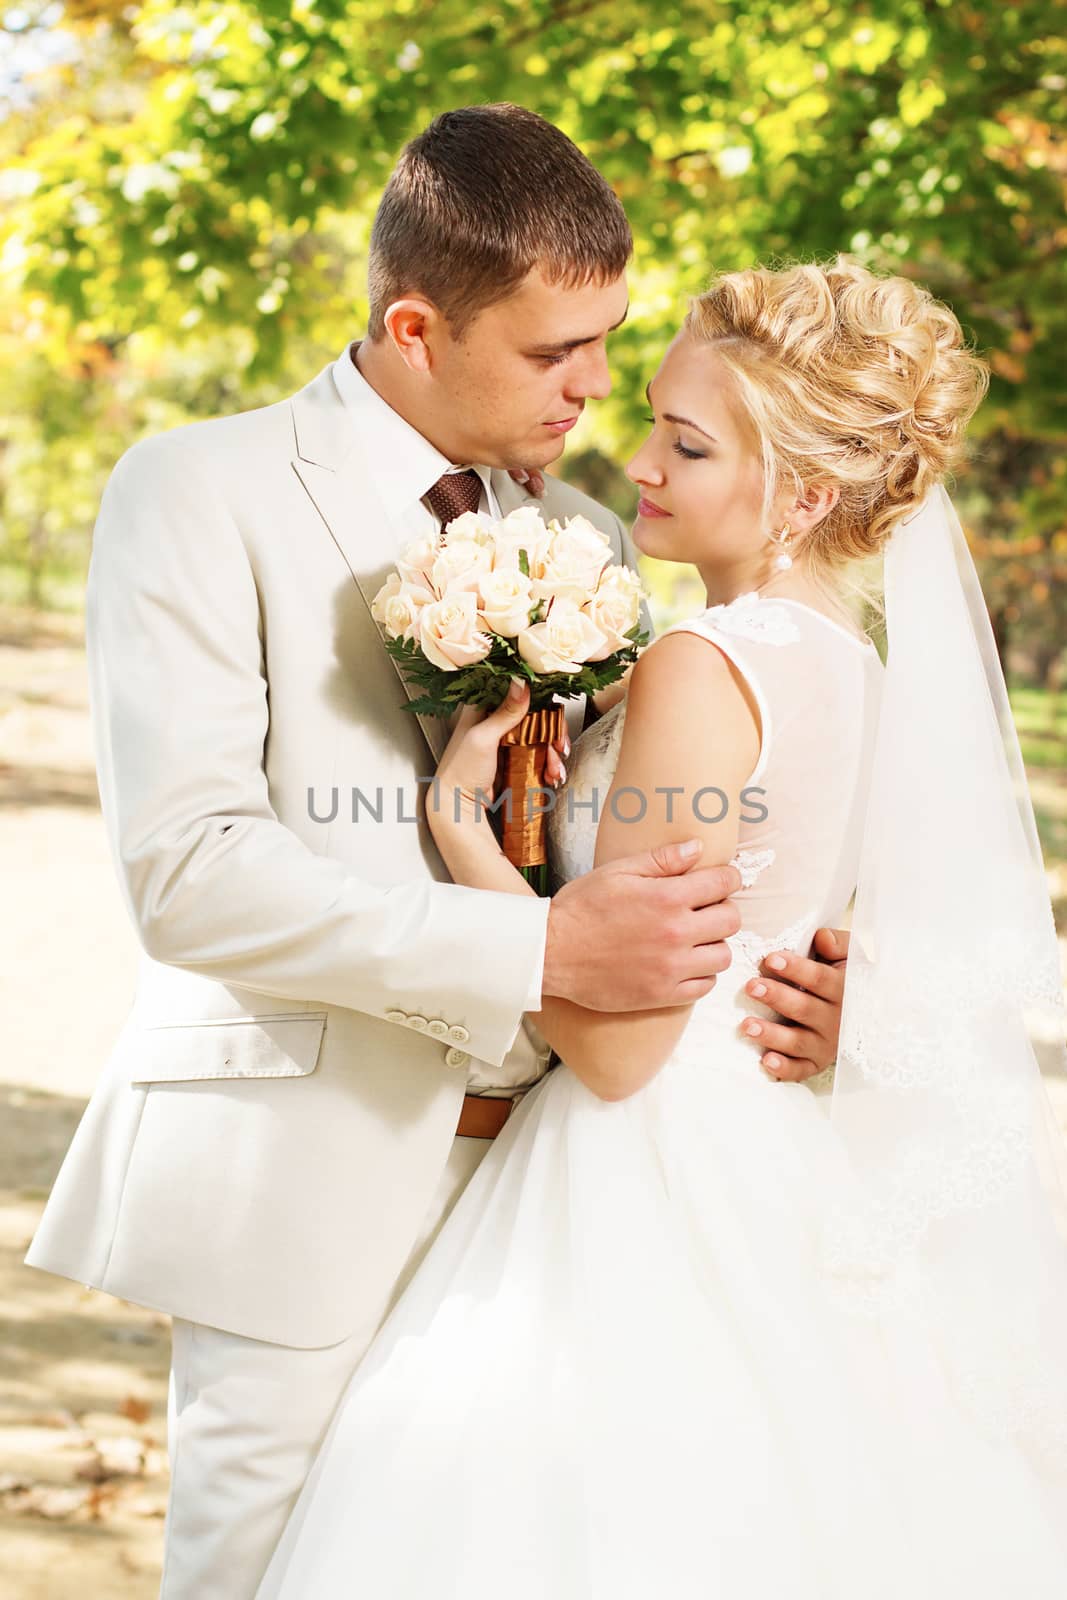 Beautiful young bride and groom in love. Wedding concept